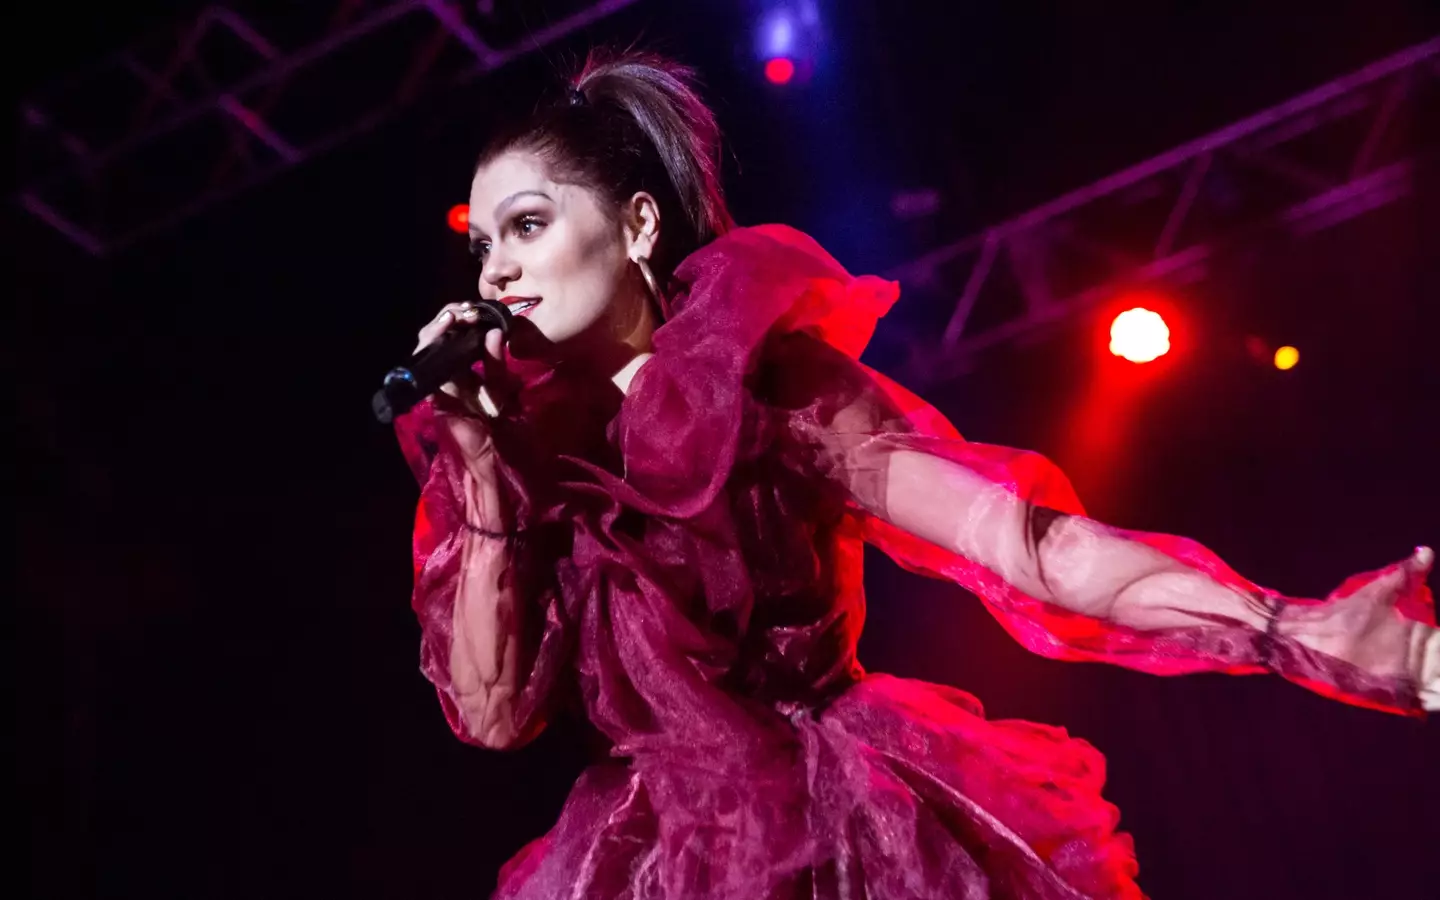 Jessie J said she plans to go ahead with a planned LA concert (